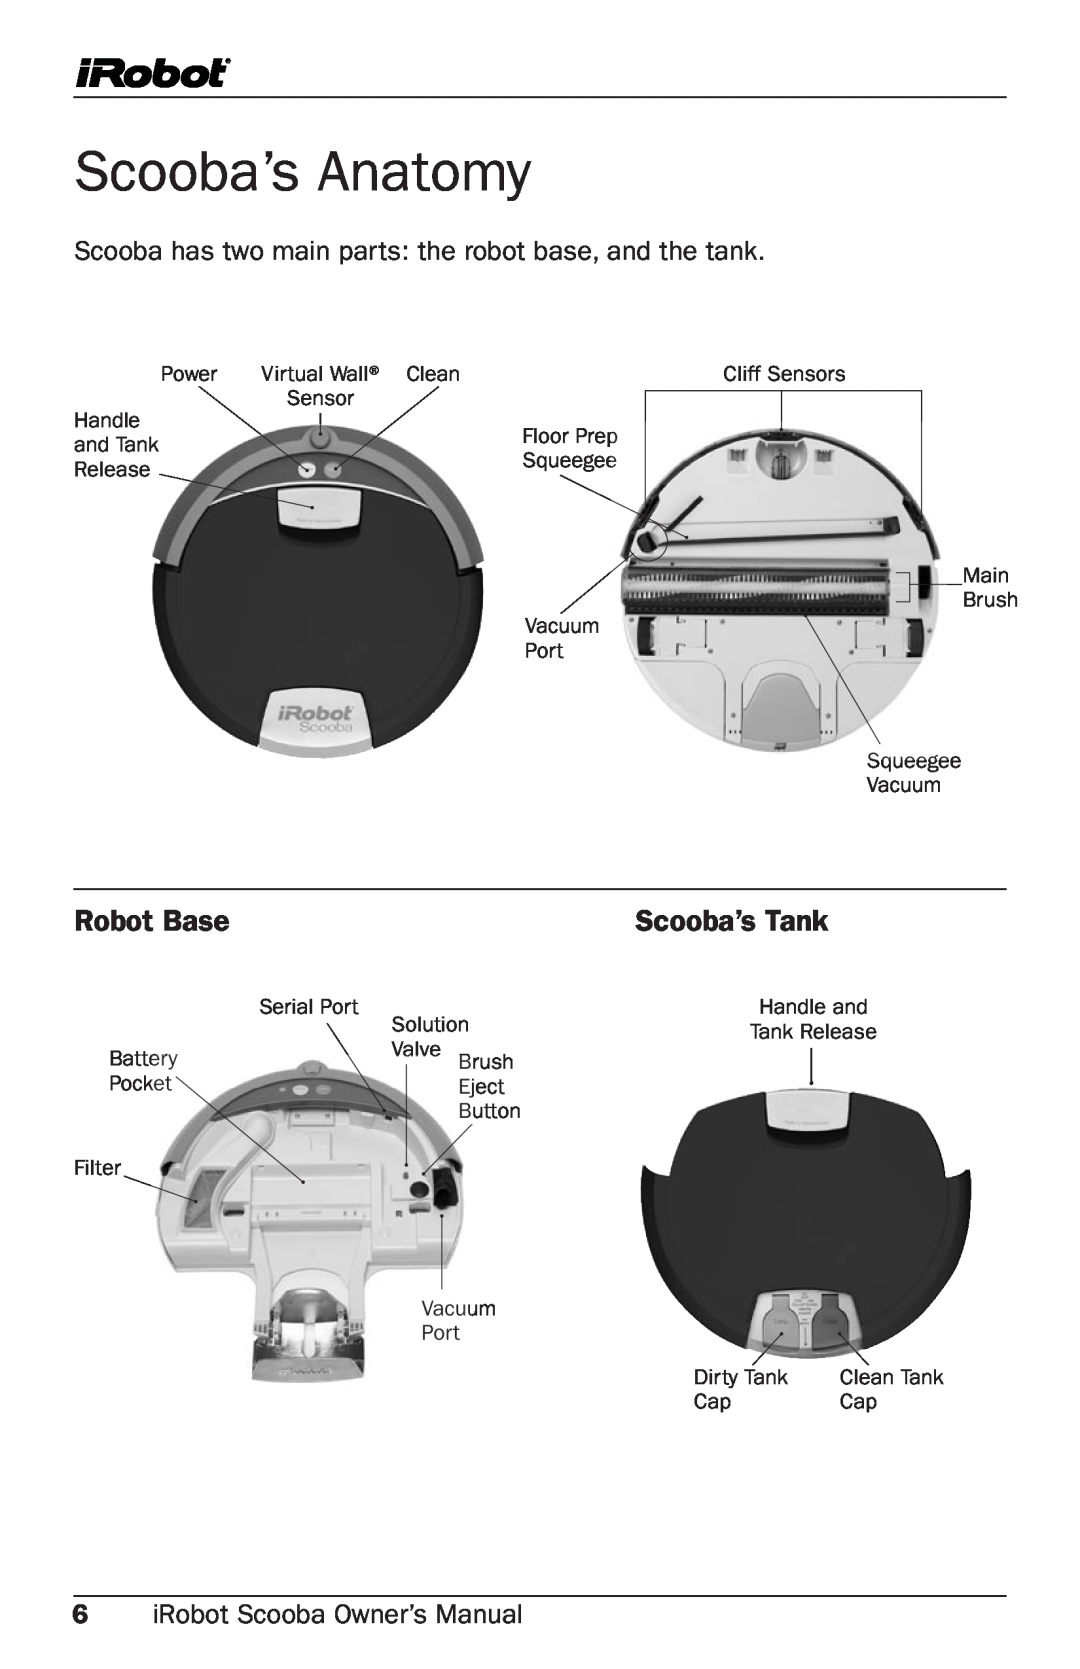 iRobot Cleaning System owner manual Scooba’s Anatomy, Robot Base, scooba’s Tank 